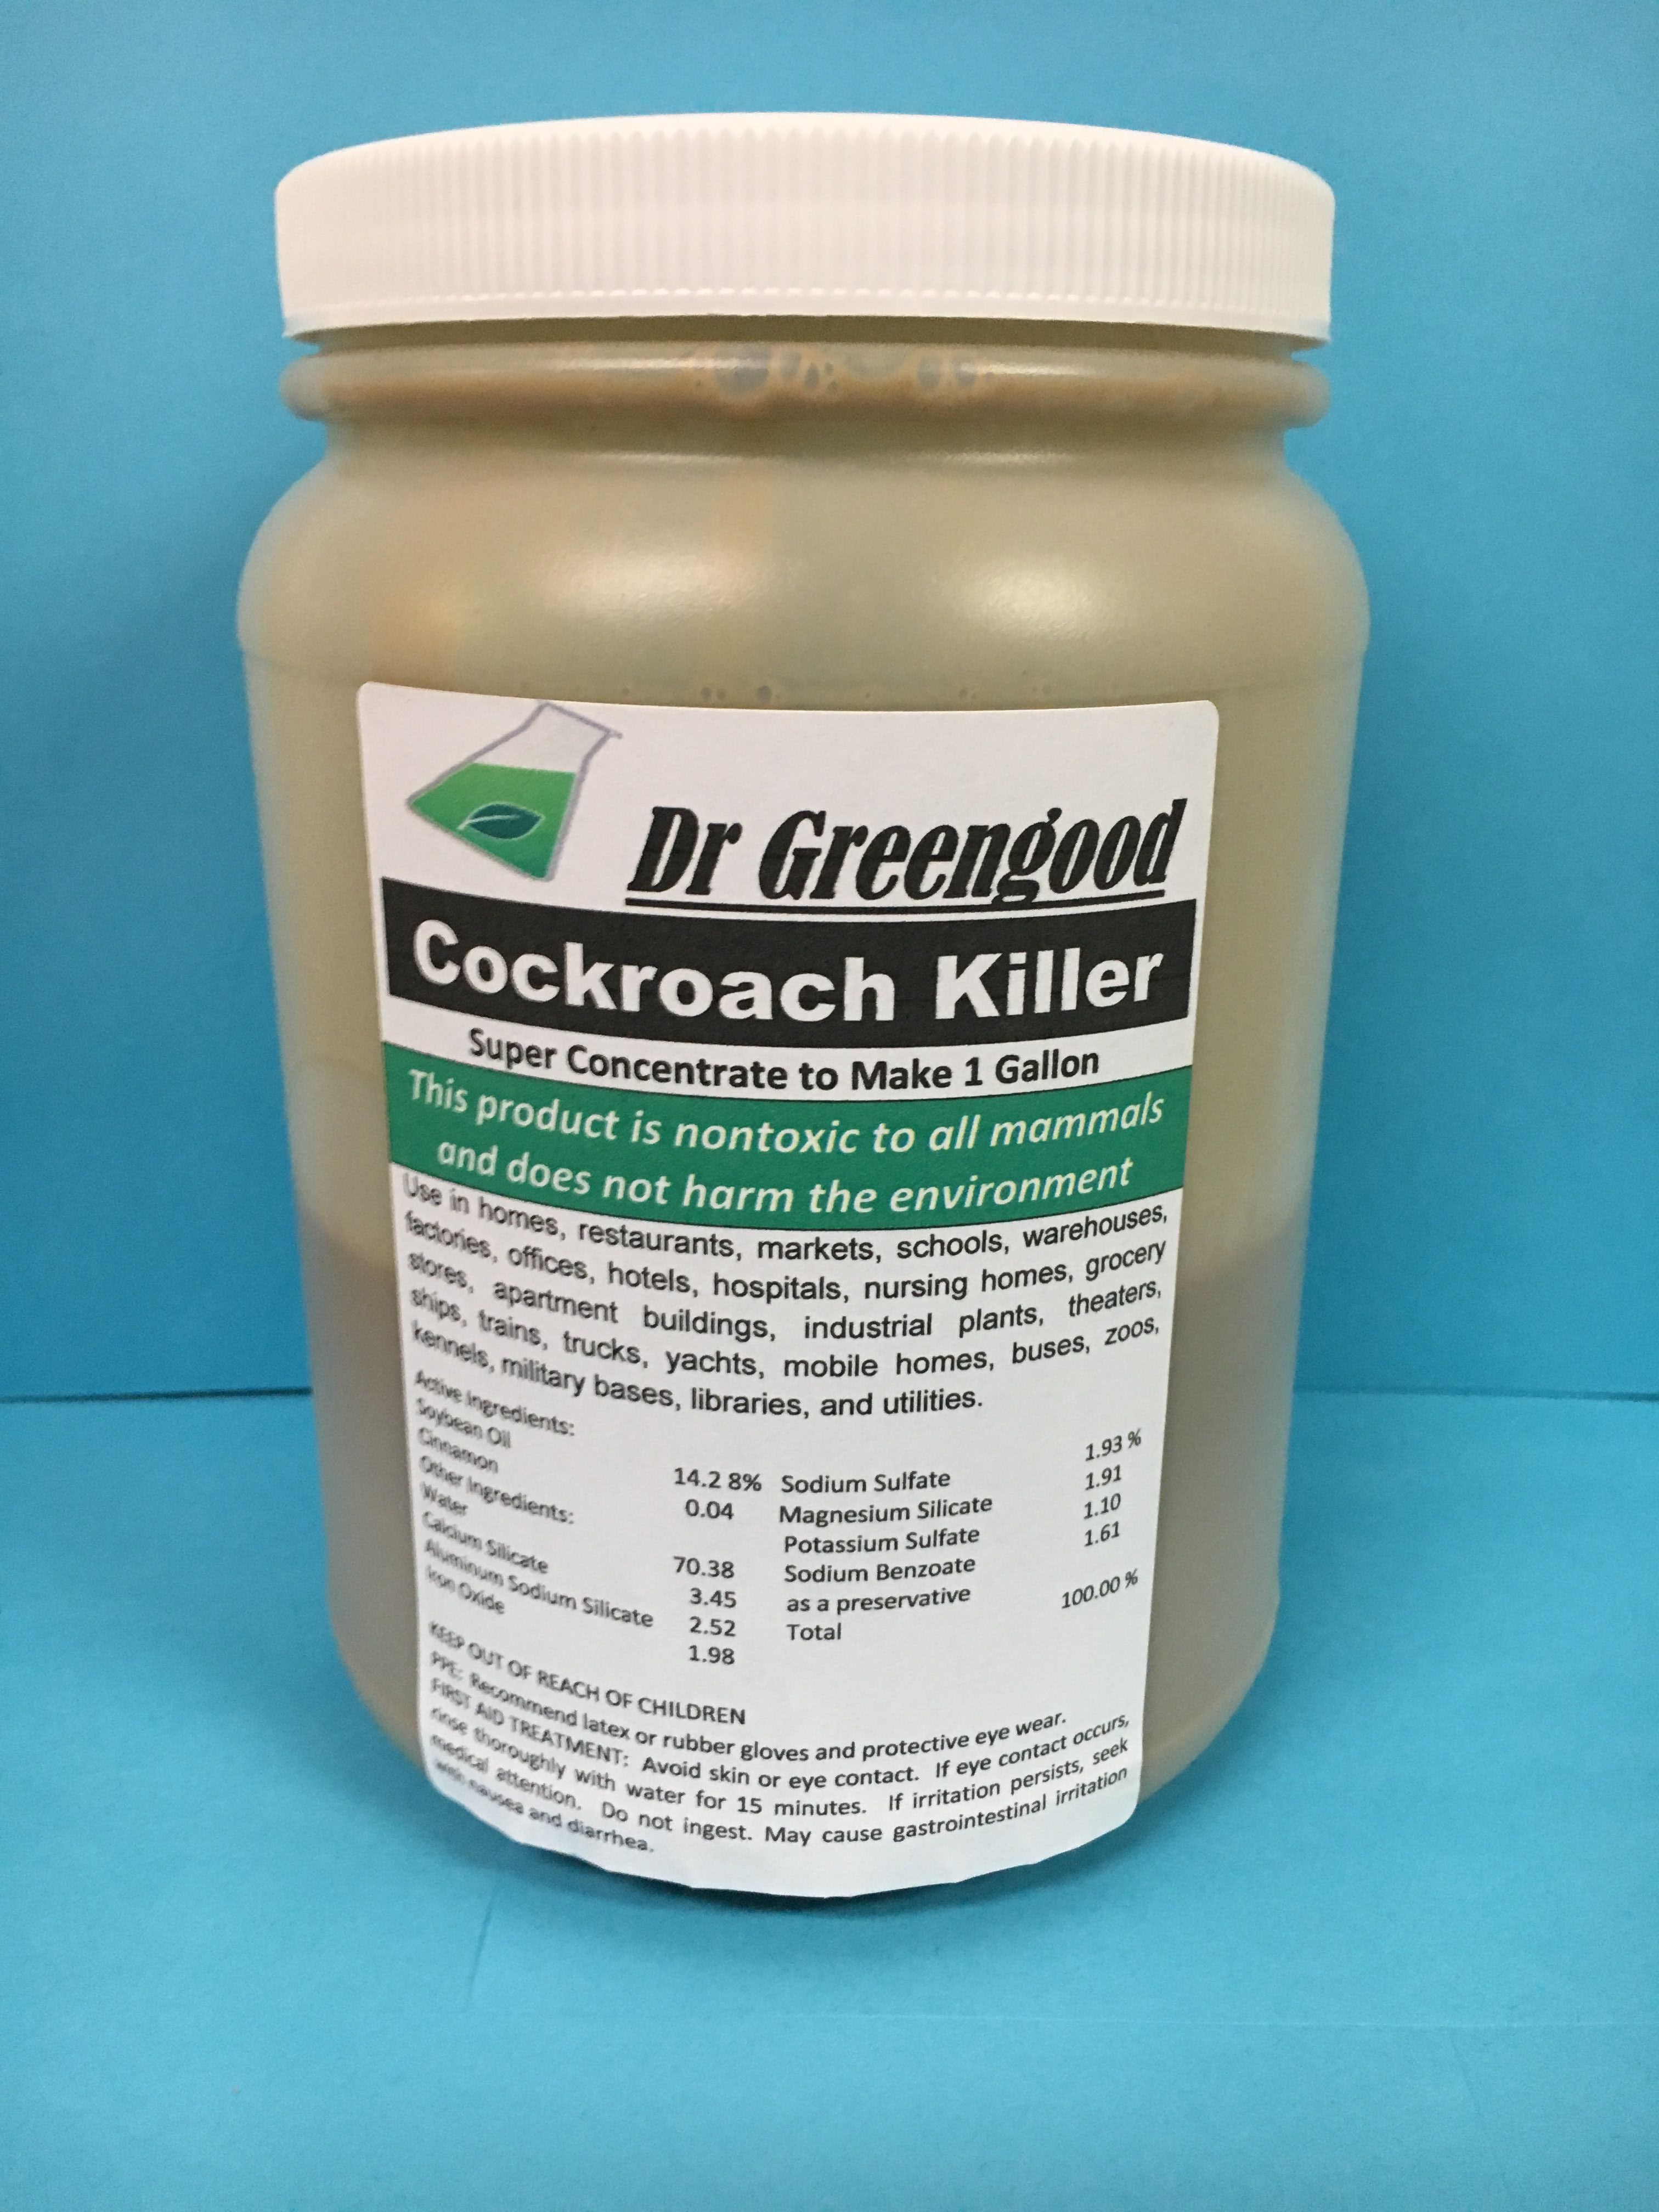 Dr Greengood Commercial Cockroach Killer